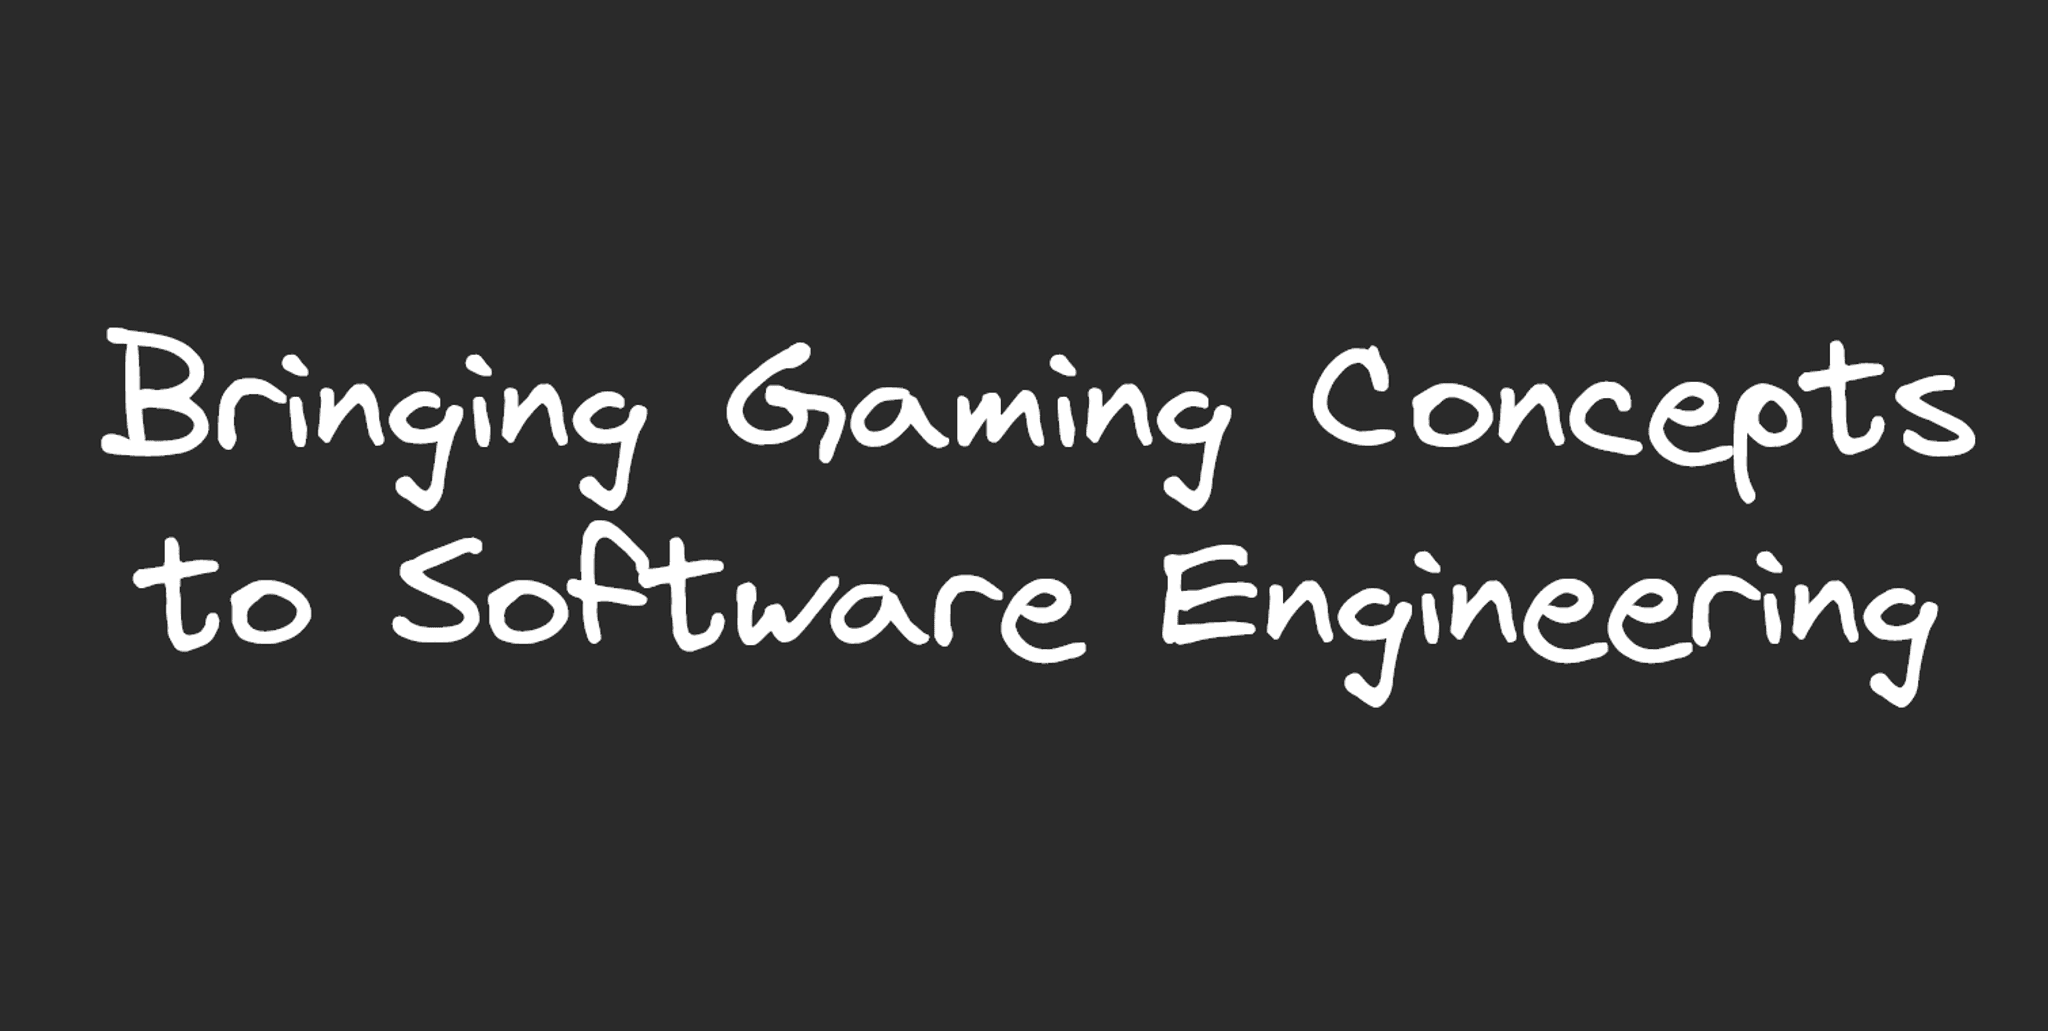 An image containing the text, "Bringing Gaming Concepts to Software Engineering".